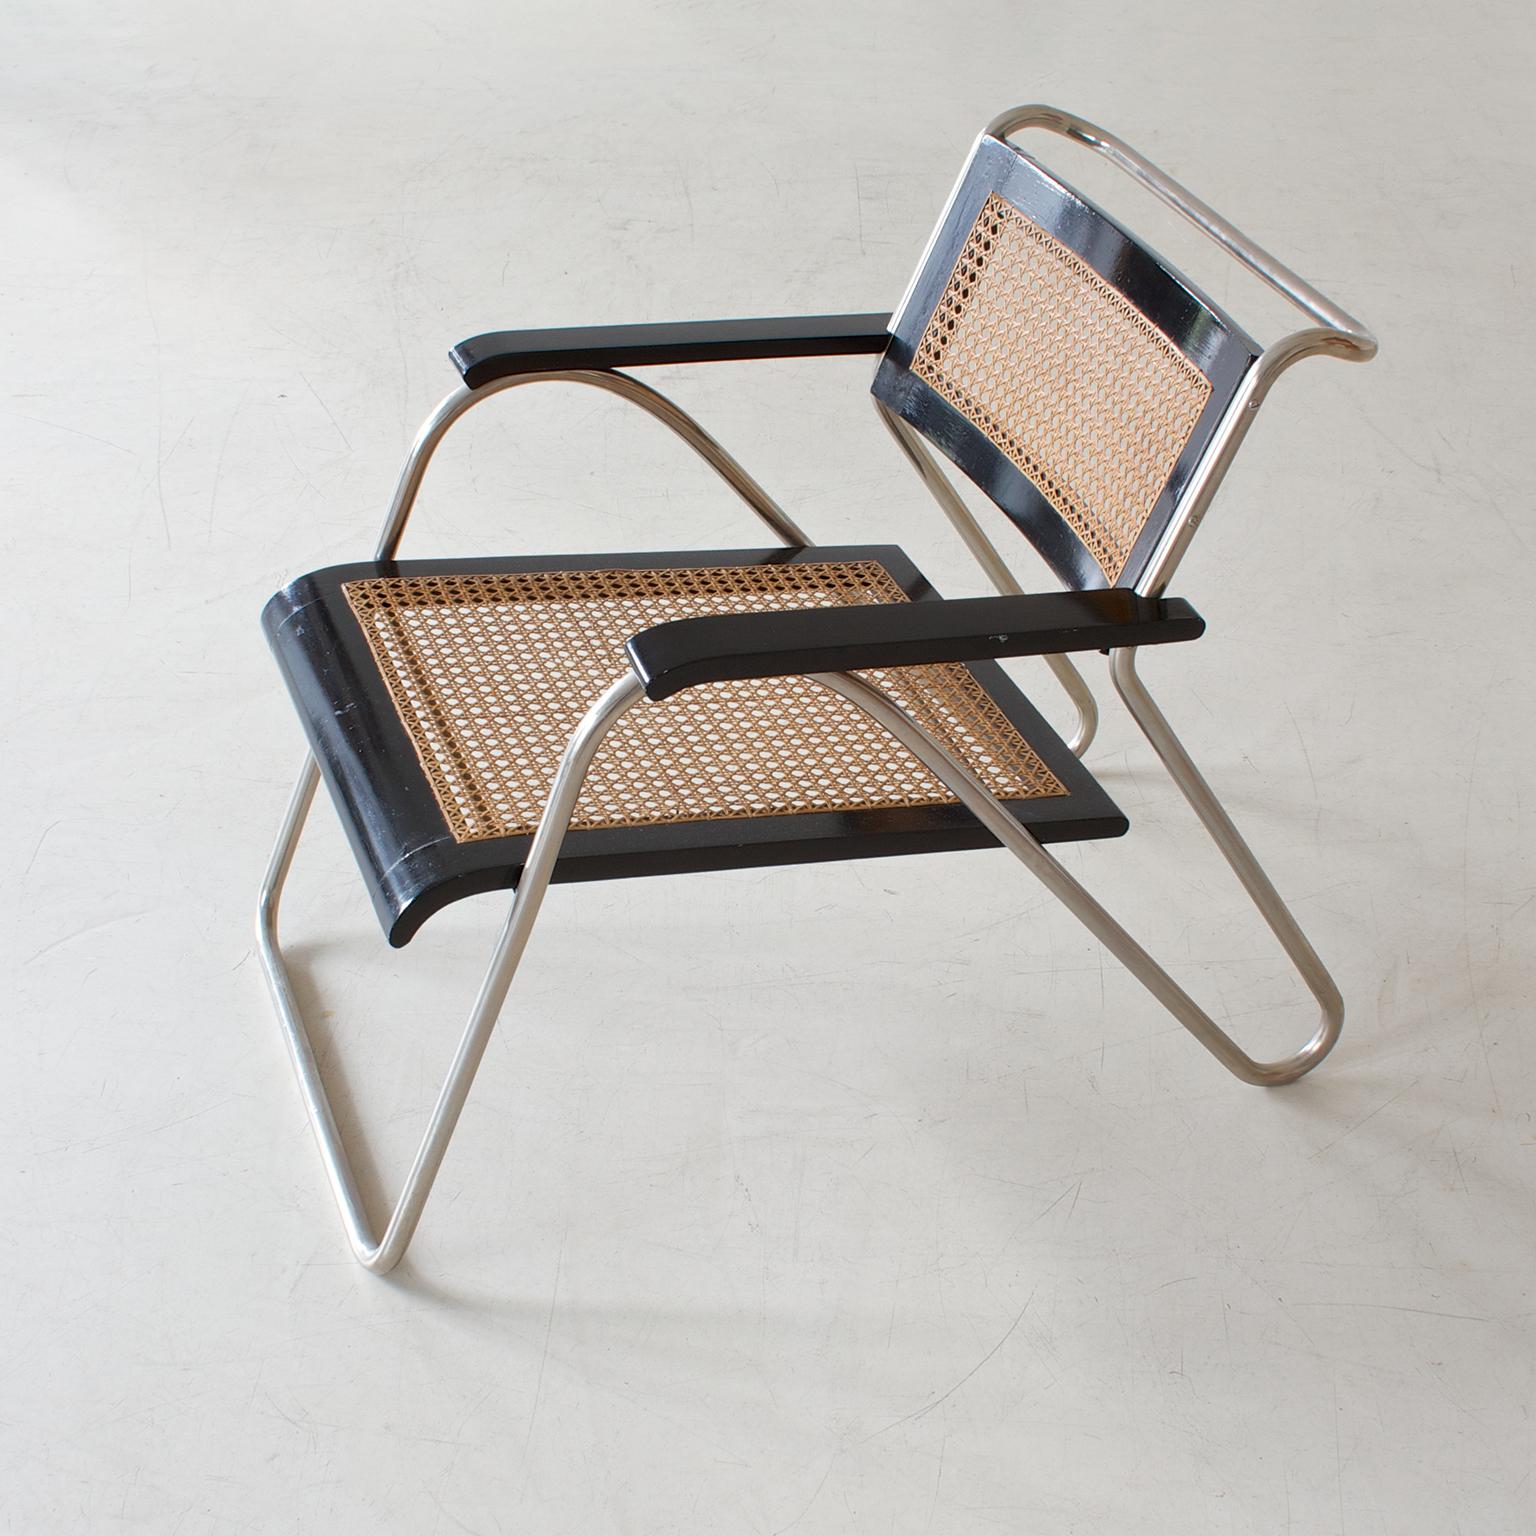 Plated Bauhaus Tubular Steel Armchairs by Erich Dieckmann, Black Lacquered Wood, 1931